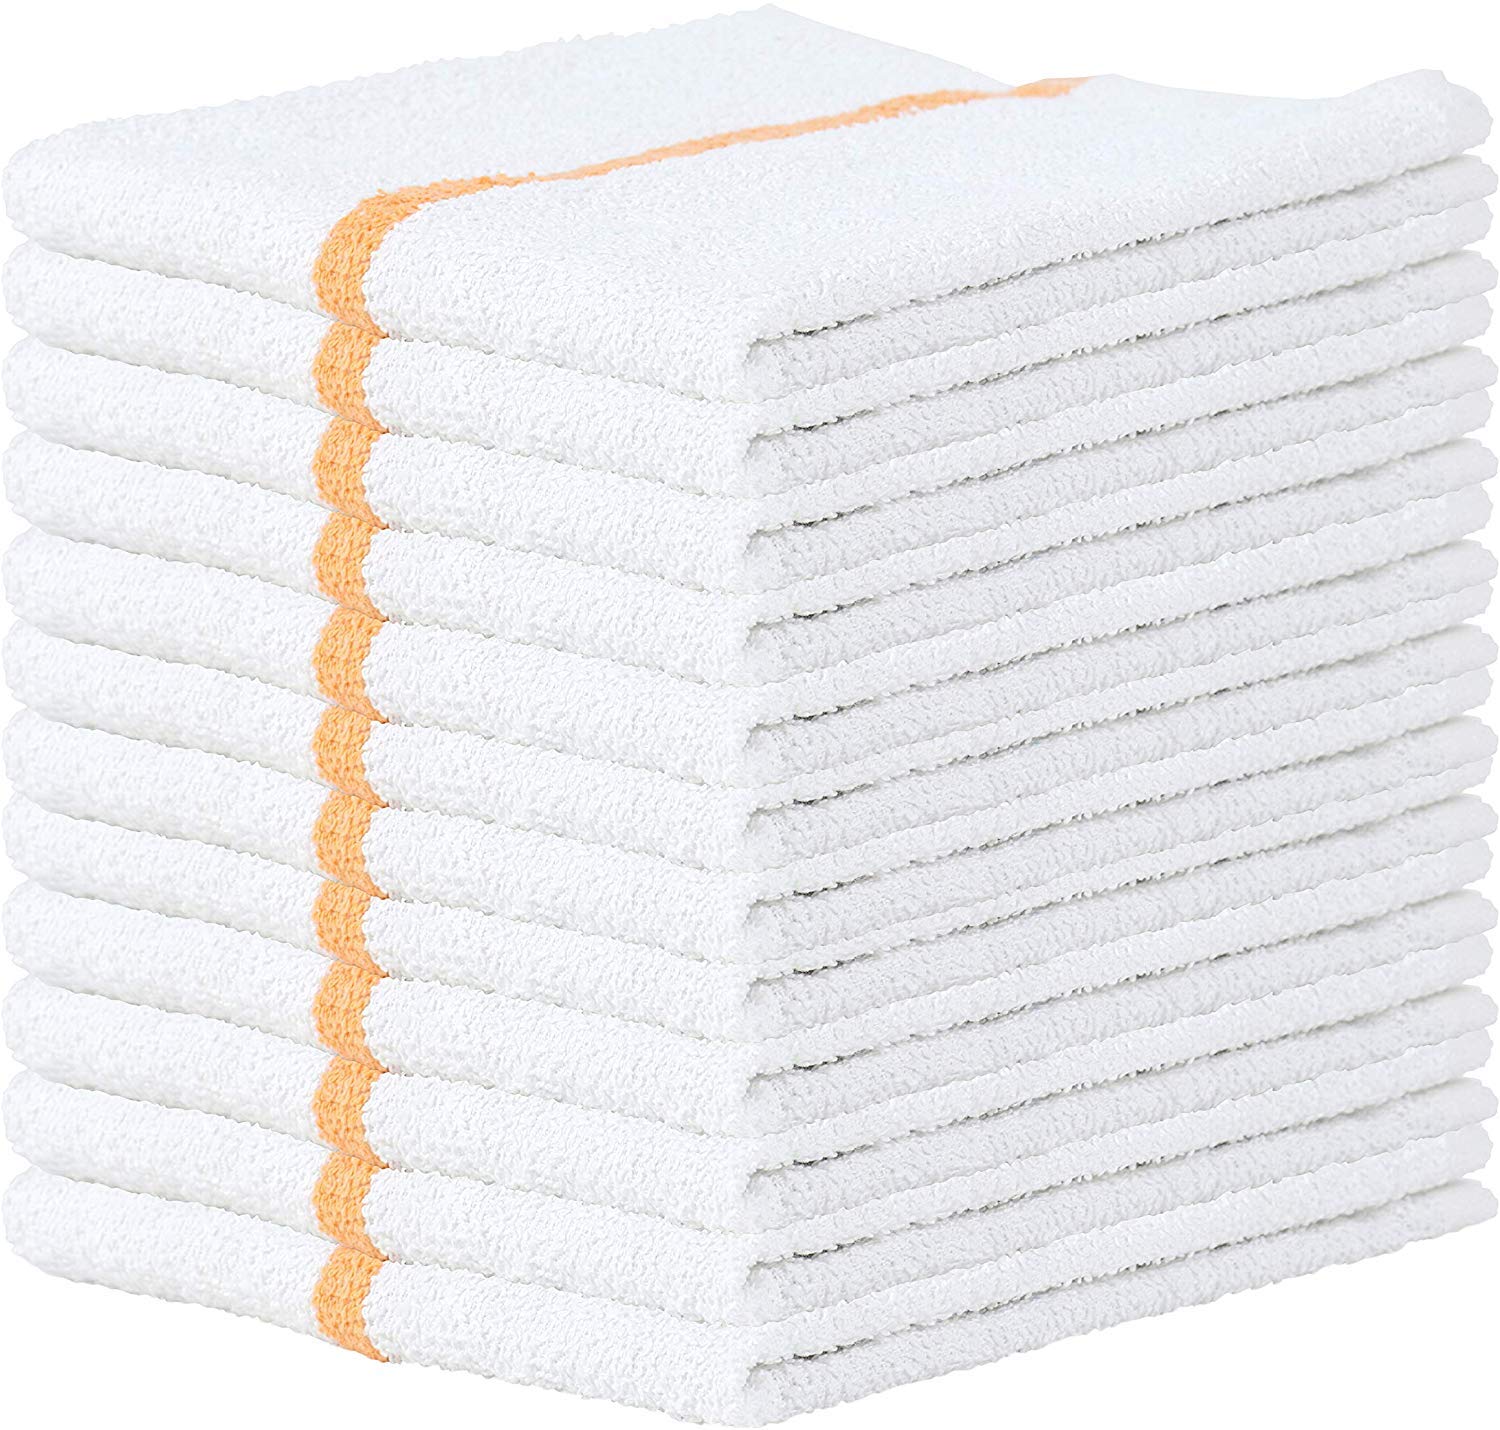 Towels N More 24 Gold Stripe Cleaning Towels